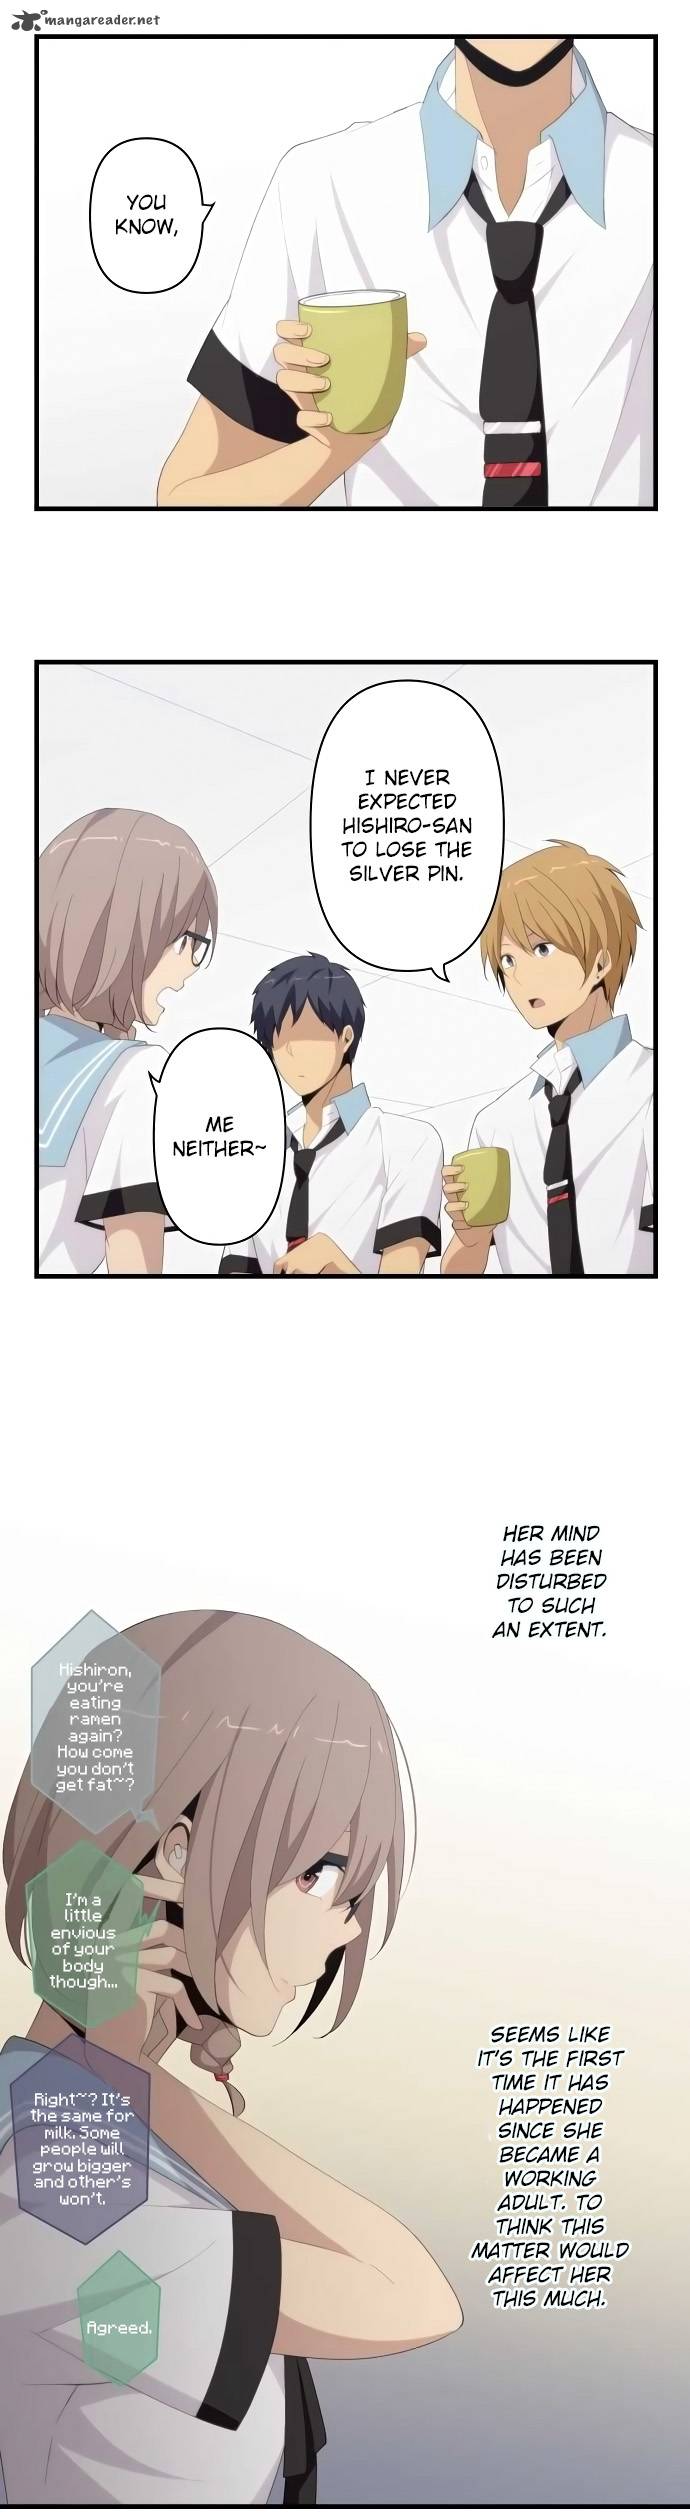 Relife 124 18